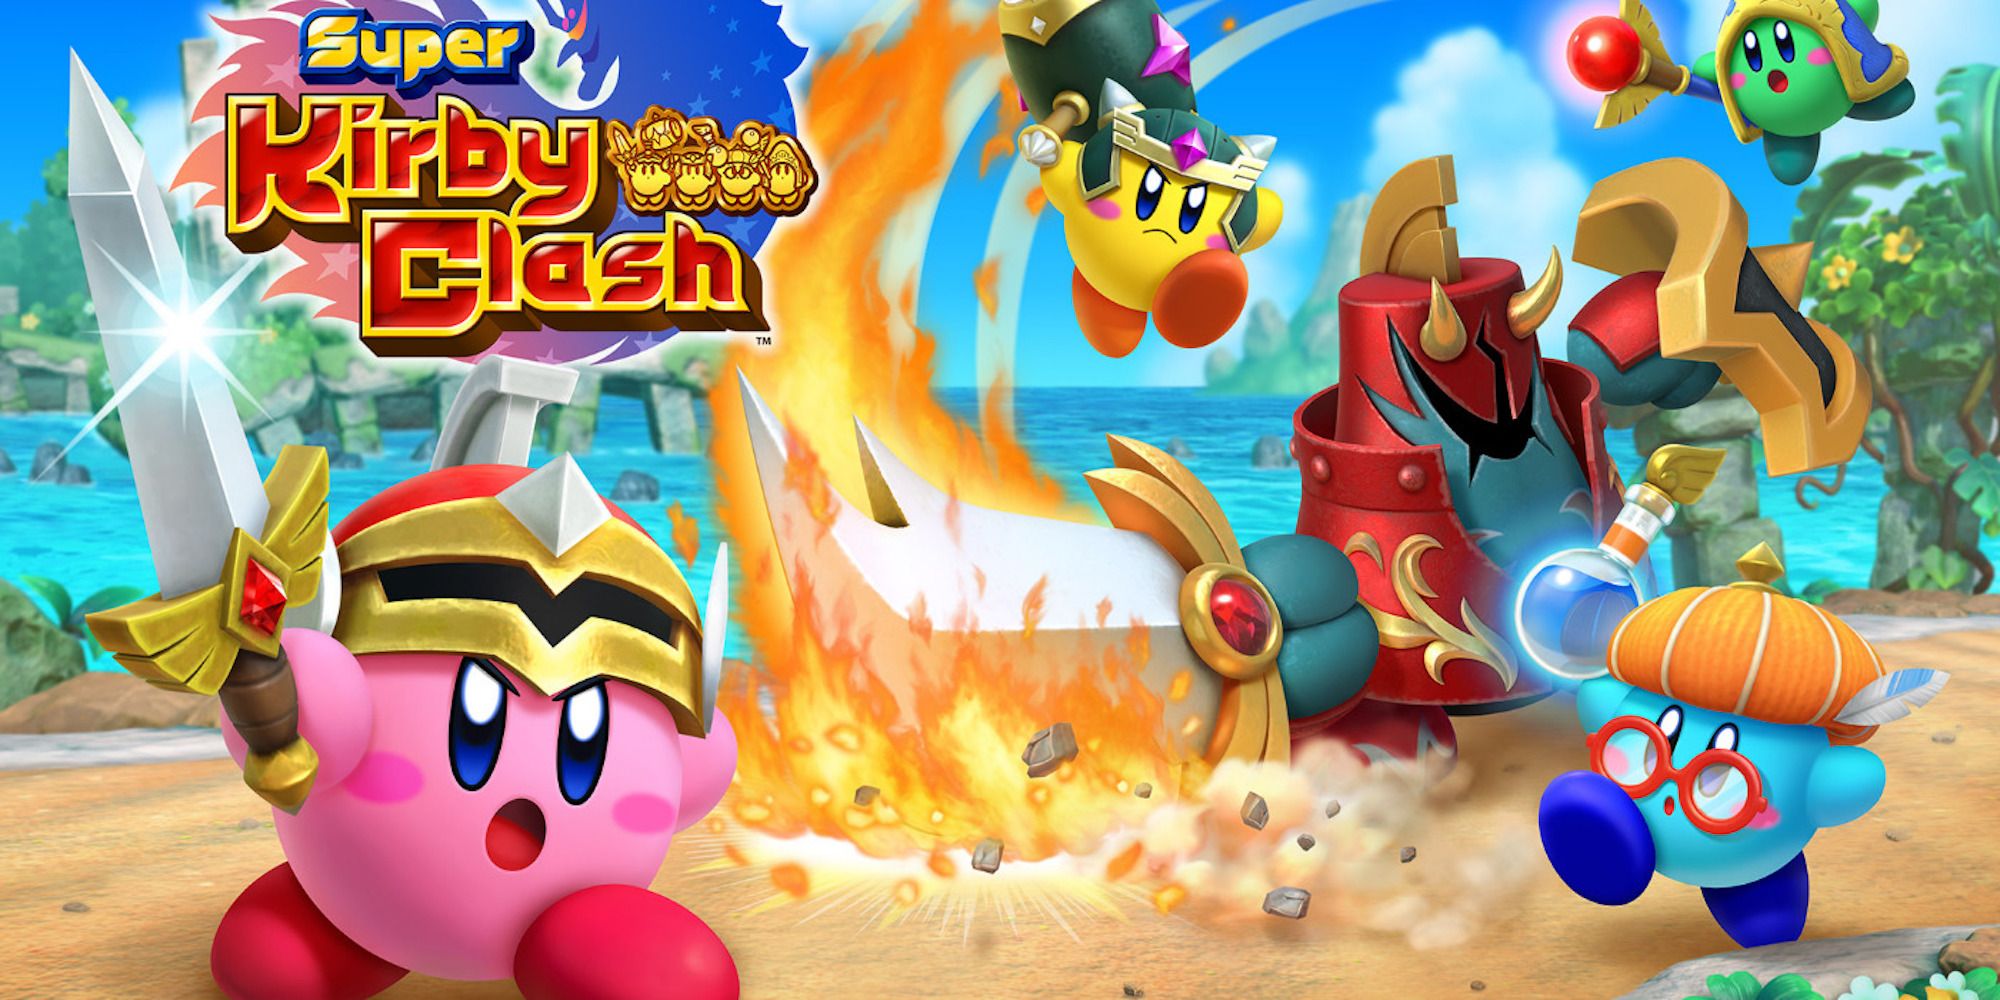 Promo art featuring character from Super Kirby Clash